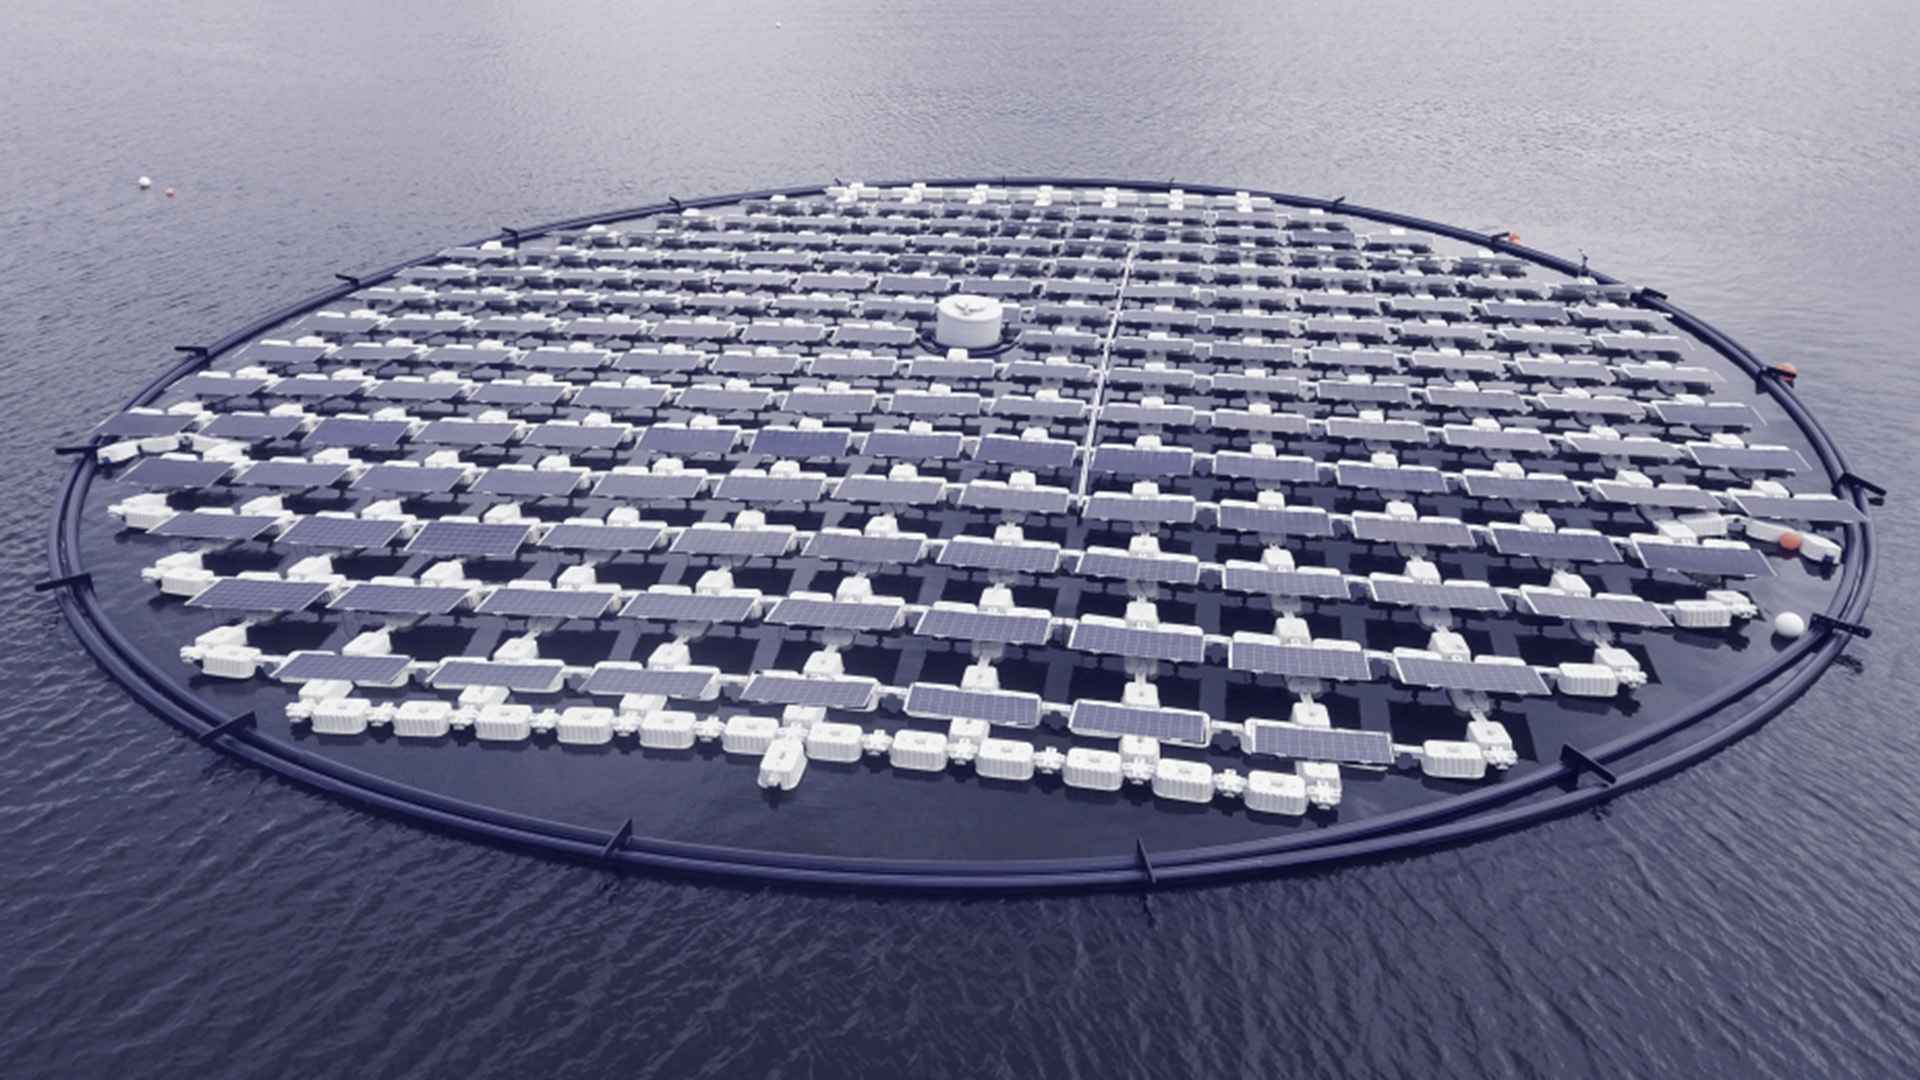 SolarisFloat is pioneering the development of floating solar panels that dynamically track sunlight to make the technology more efficient.